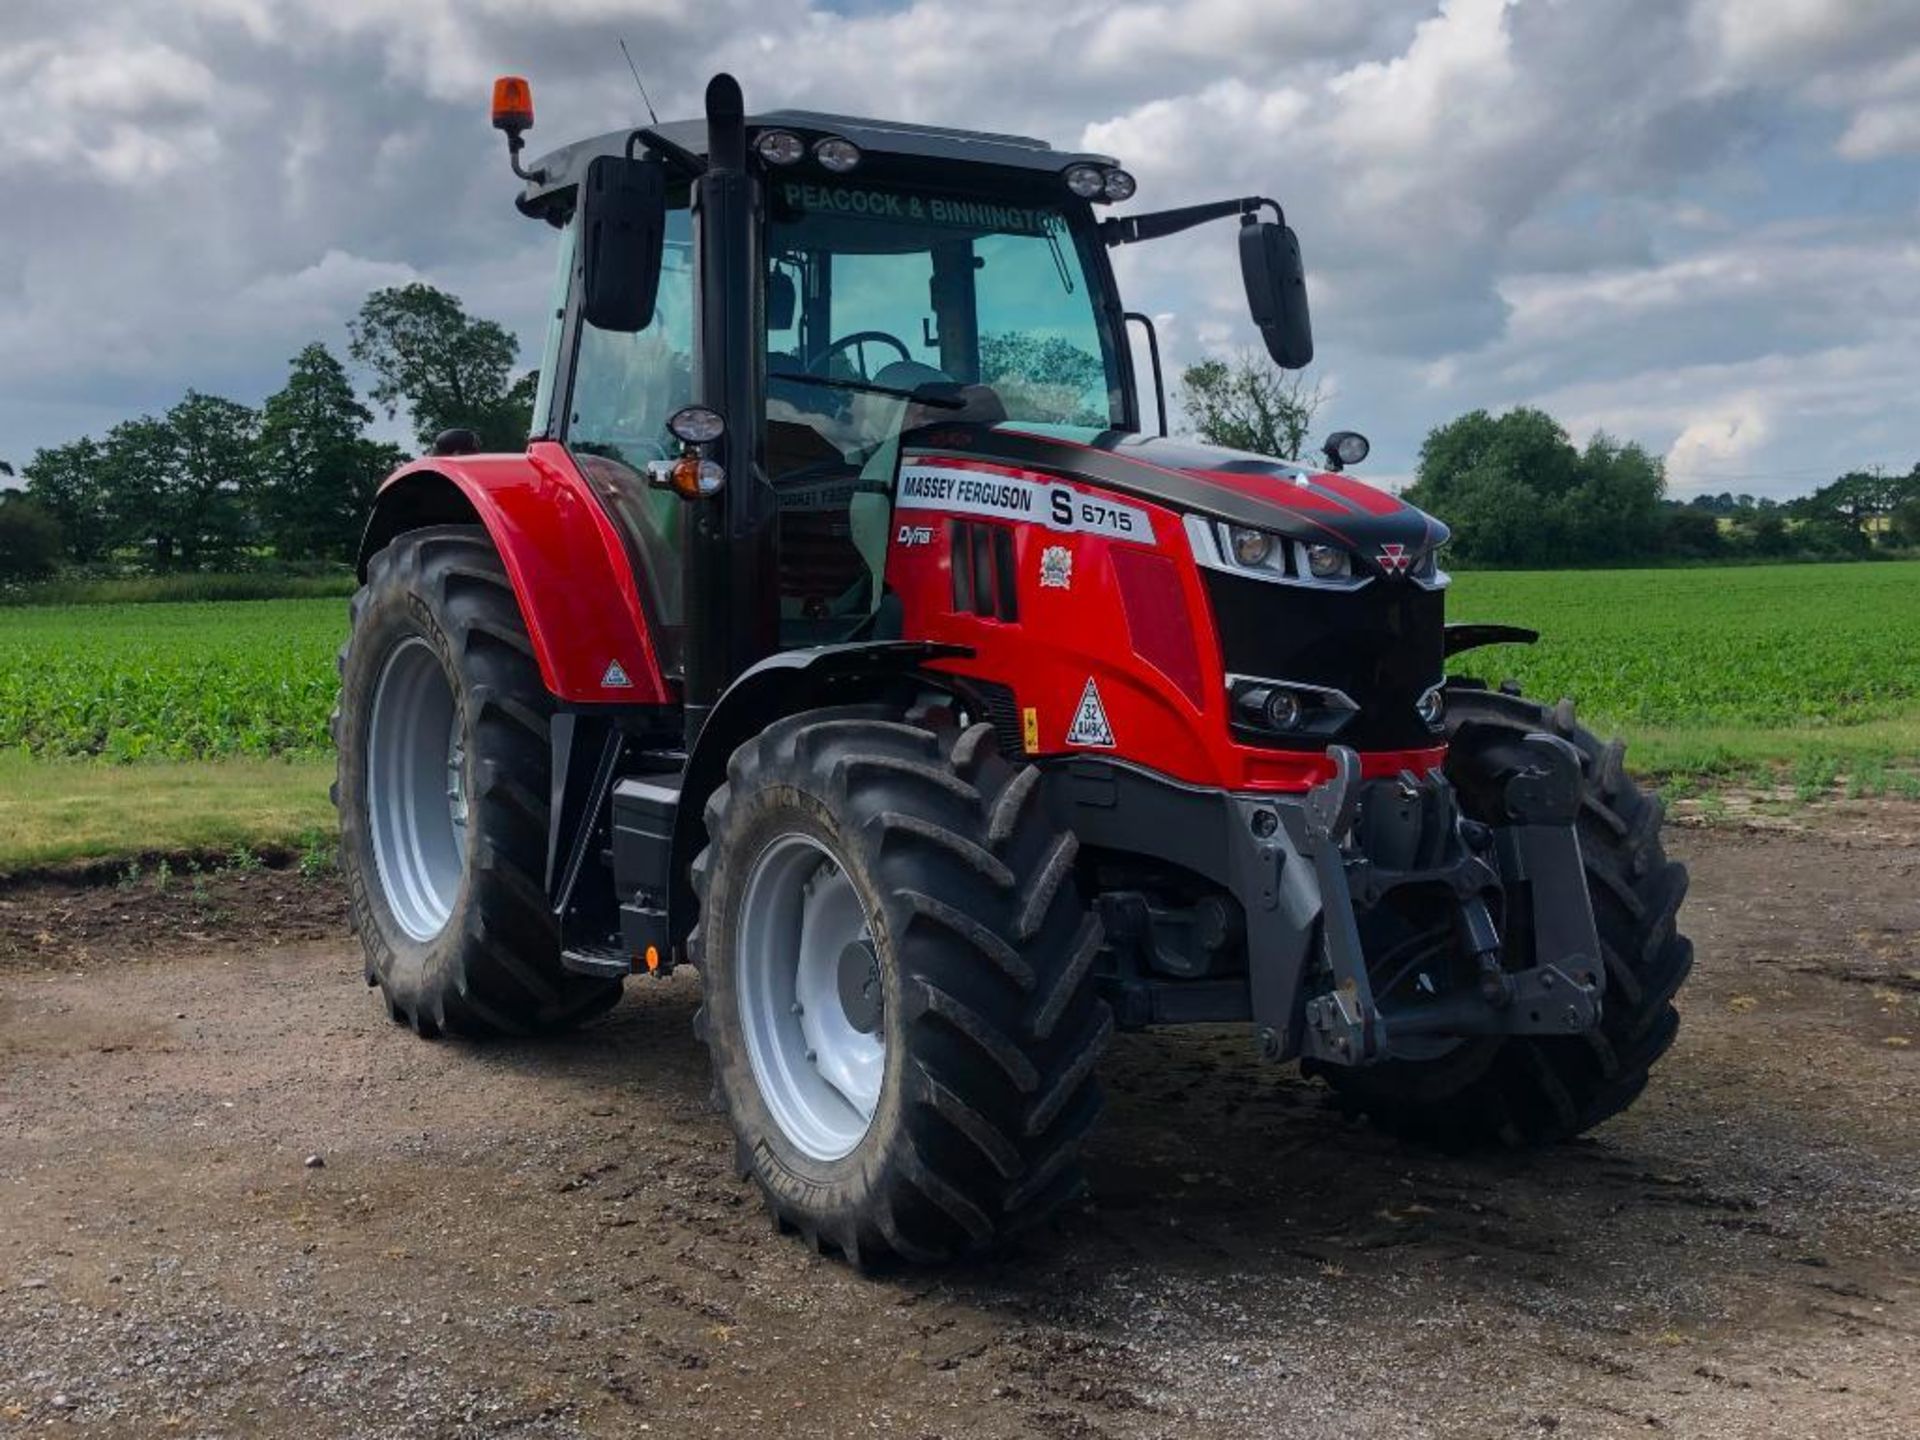 2019 Massey Ferguson 6715 S Dyna 6 50kph 4wd tractor c/w 3 manual spools, front linkage, air brakes, - Image 17 of 41